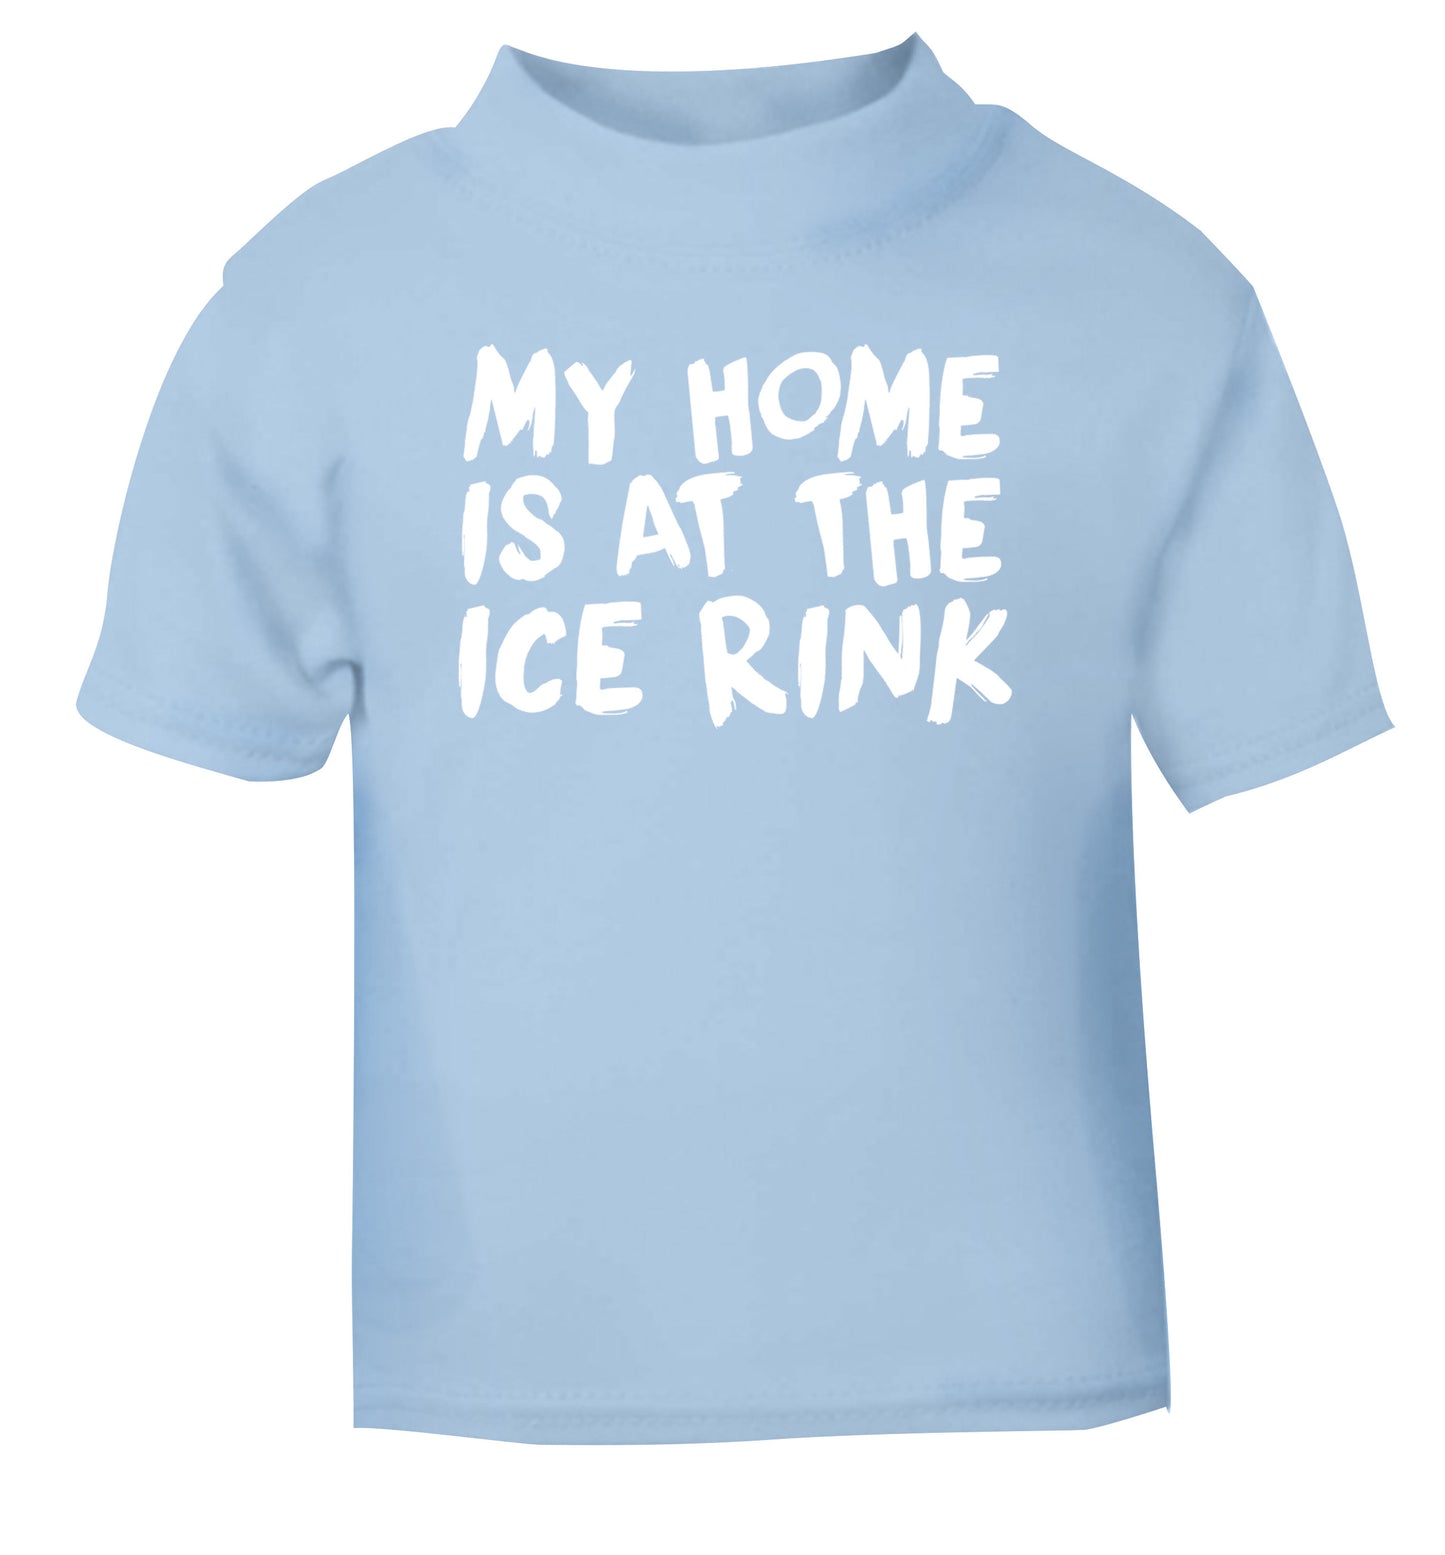 My home is at the ice rink light blue Baby Toddler Tshirt 2 Years